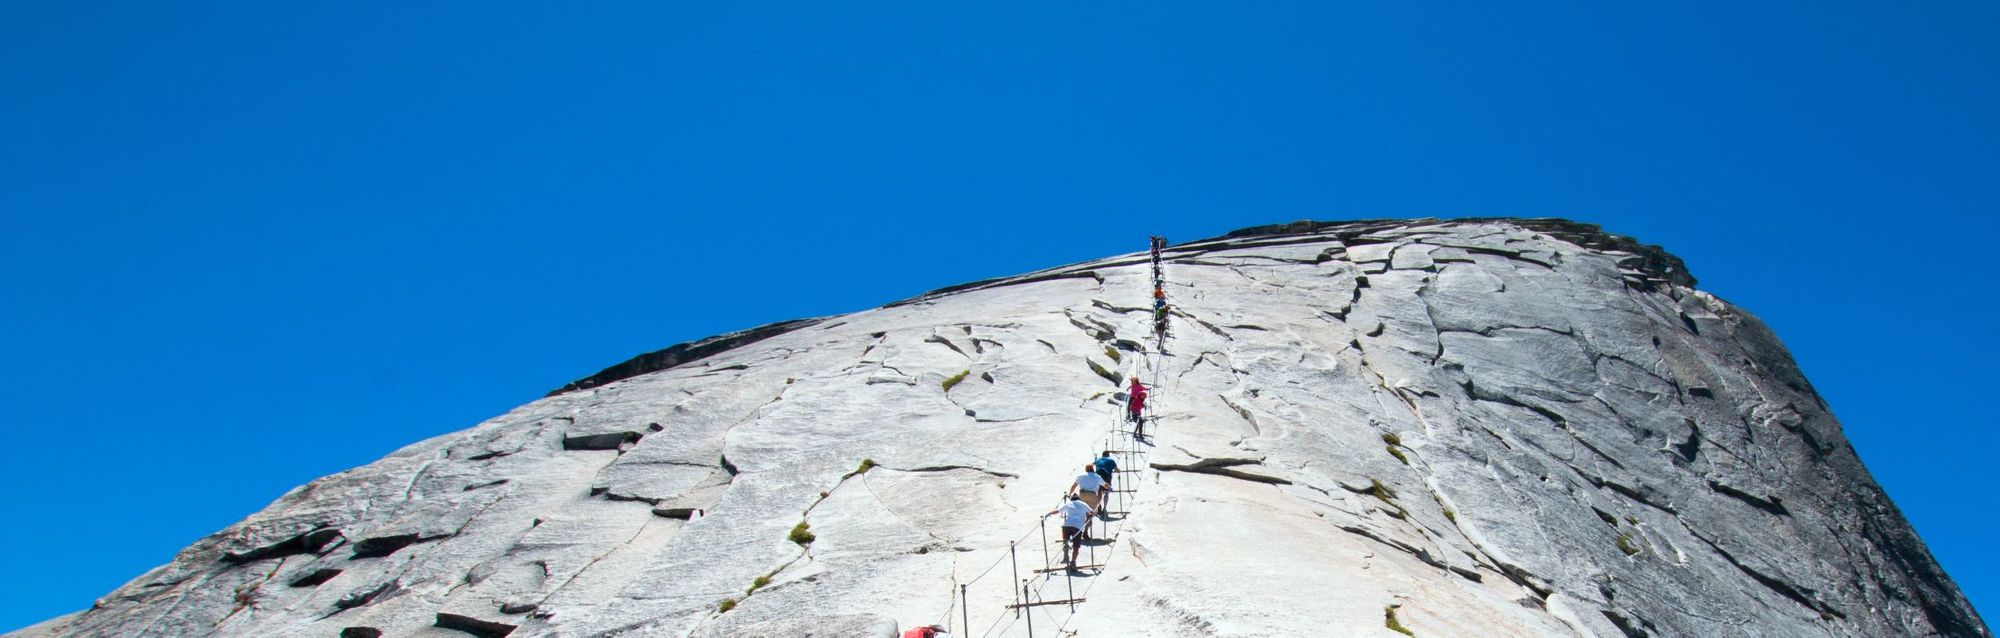 Hikers making their way to the slippery summit of Half Dome, Yosemite, along a system of cables.